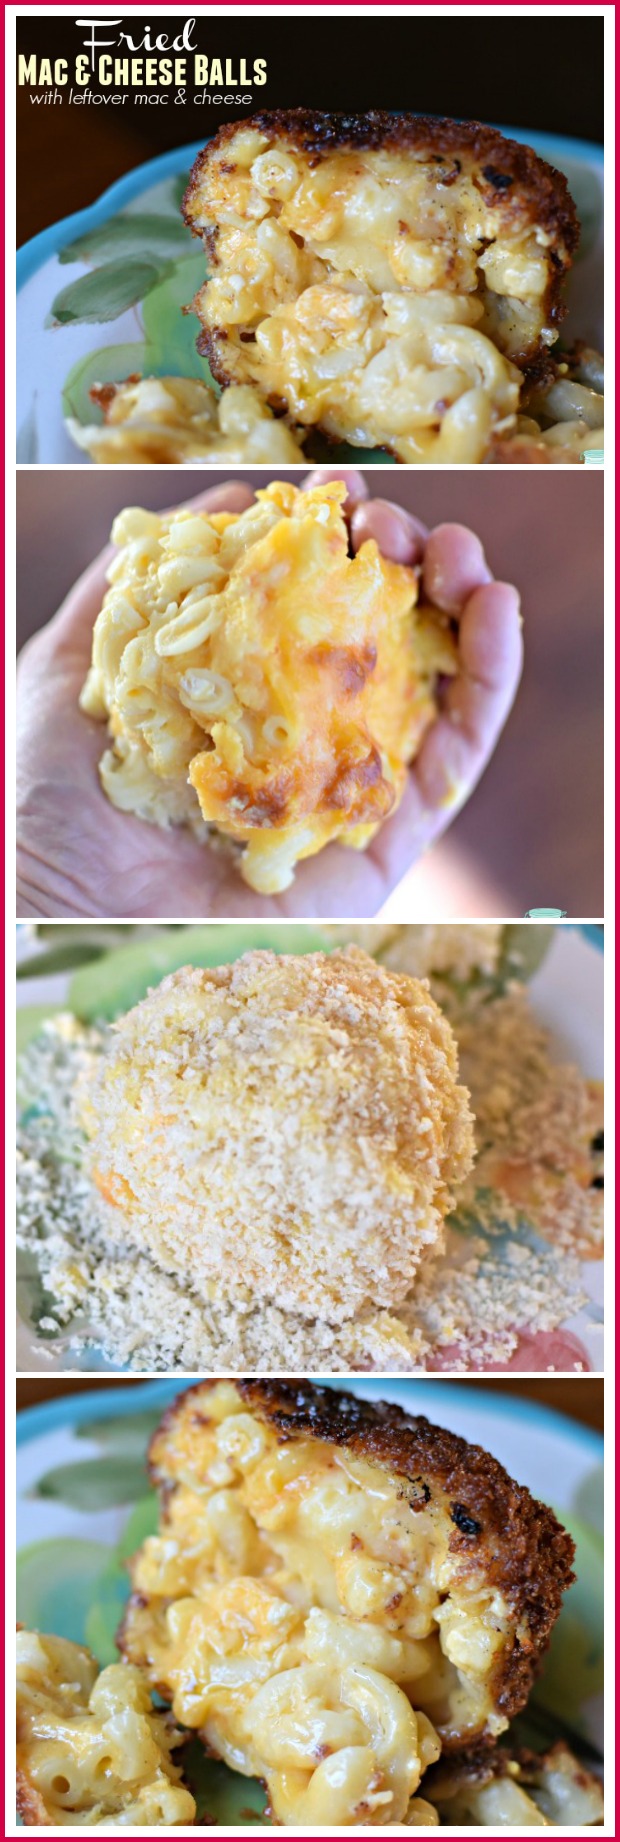 fried Mac and cheese balls made with leftover macaroni and cheese